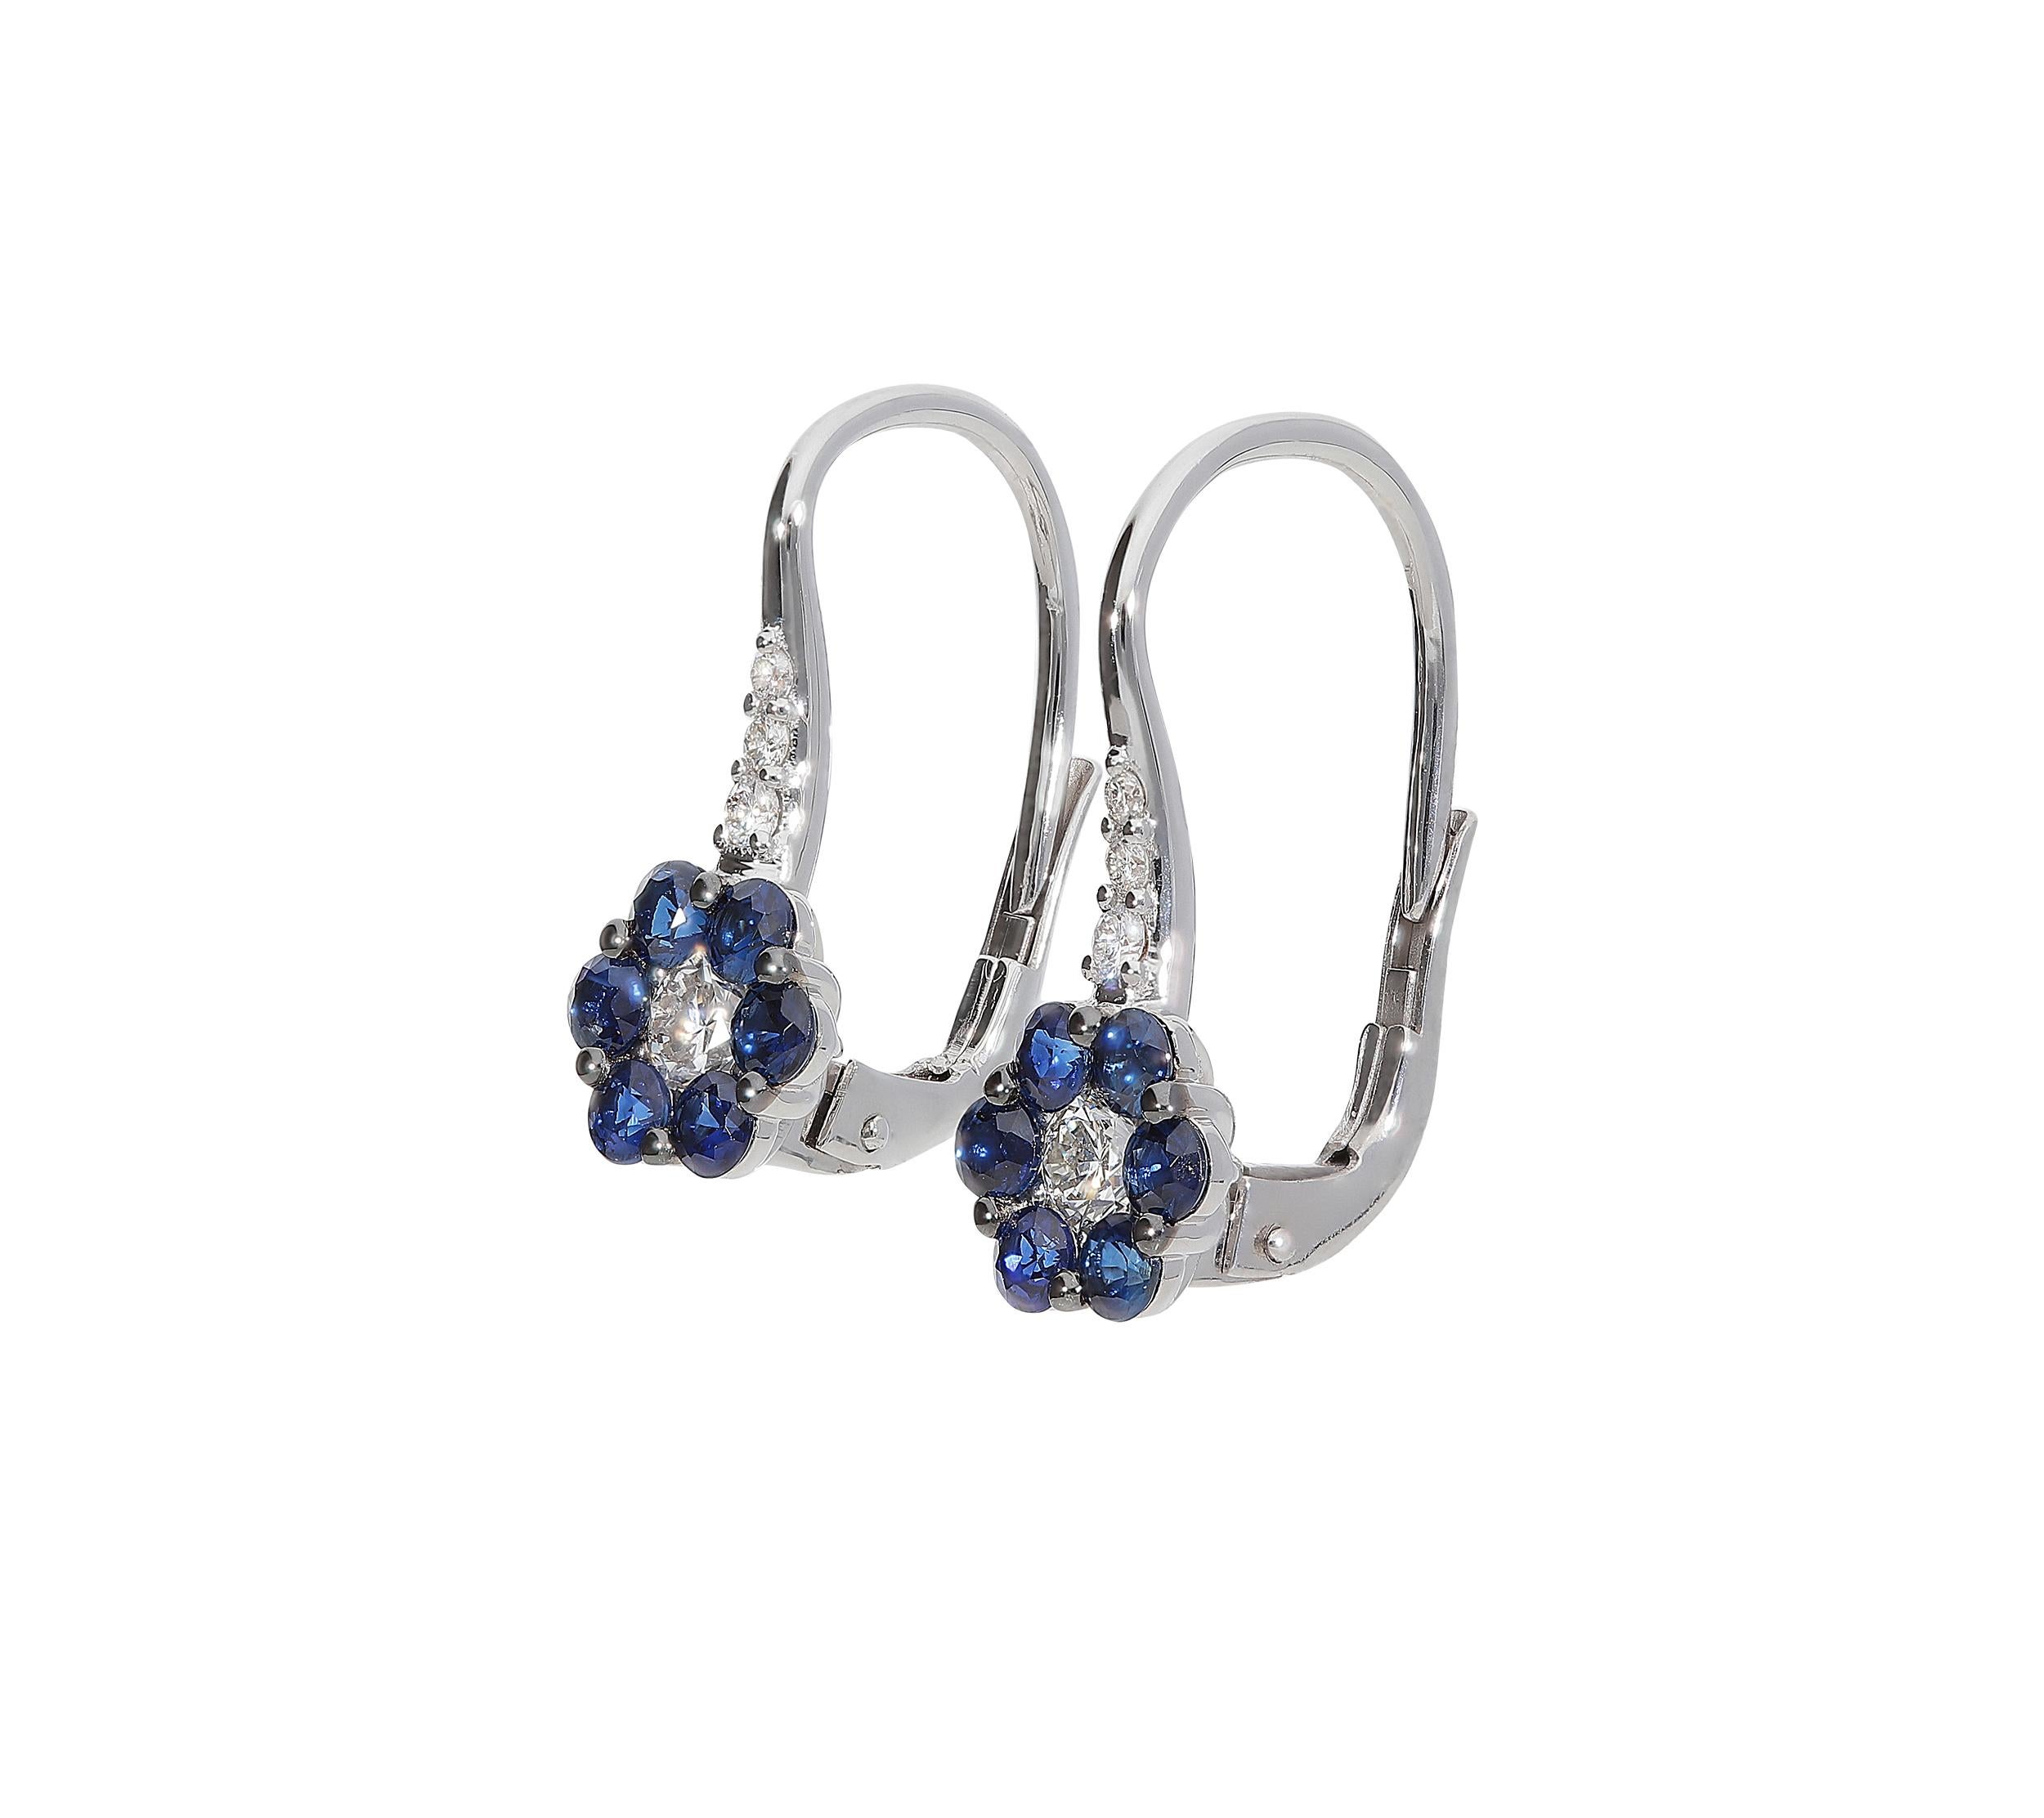 Flower earrings in 18 kt white gold for 2.60 grams, 0.38 carats of round diamonds, 0.84 carat petals of blue sapphires with round cut.
The size of this jewel is 1.90 cm high with a diameter of 0.75 cm.
A practical pair of lever back completes the